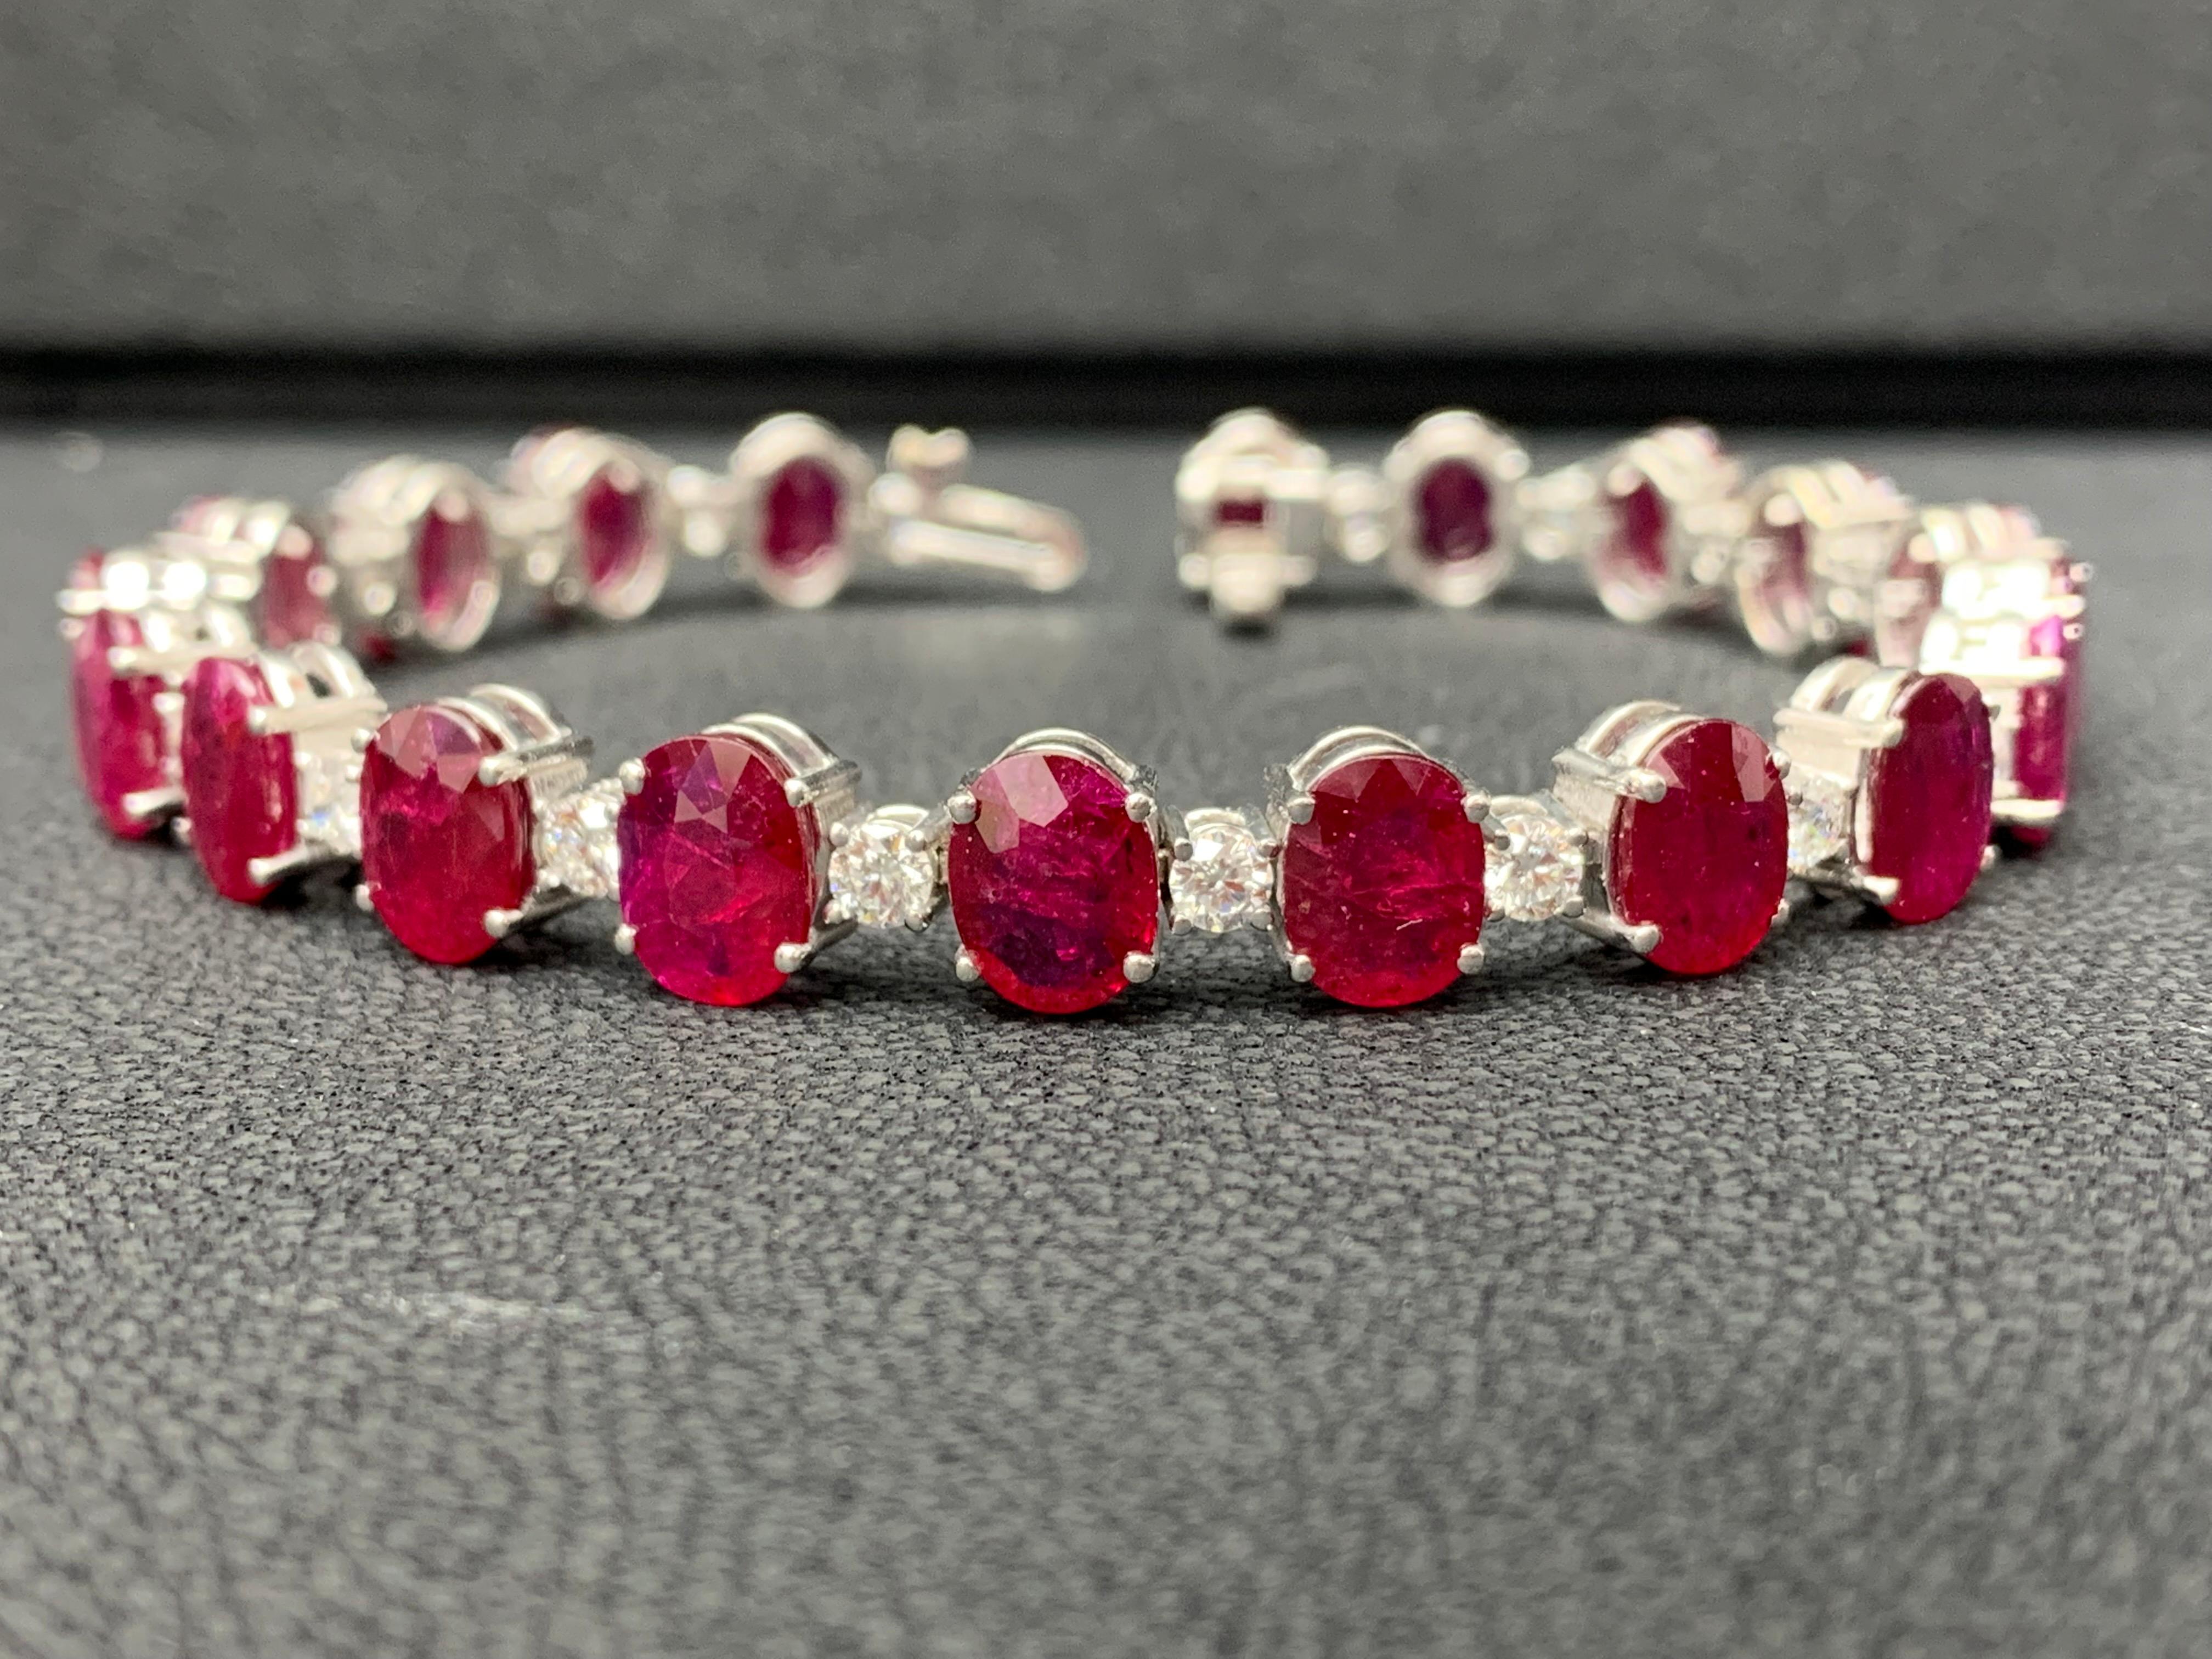 25.46 Carat Oval Cut Ruby and Diamond Tennis Bracelet in 14K White Gold For Sale 2